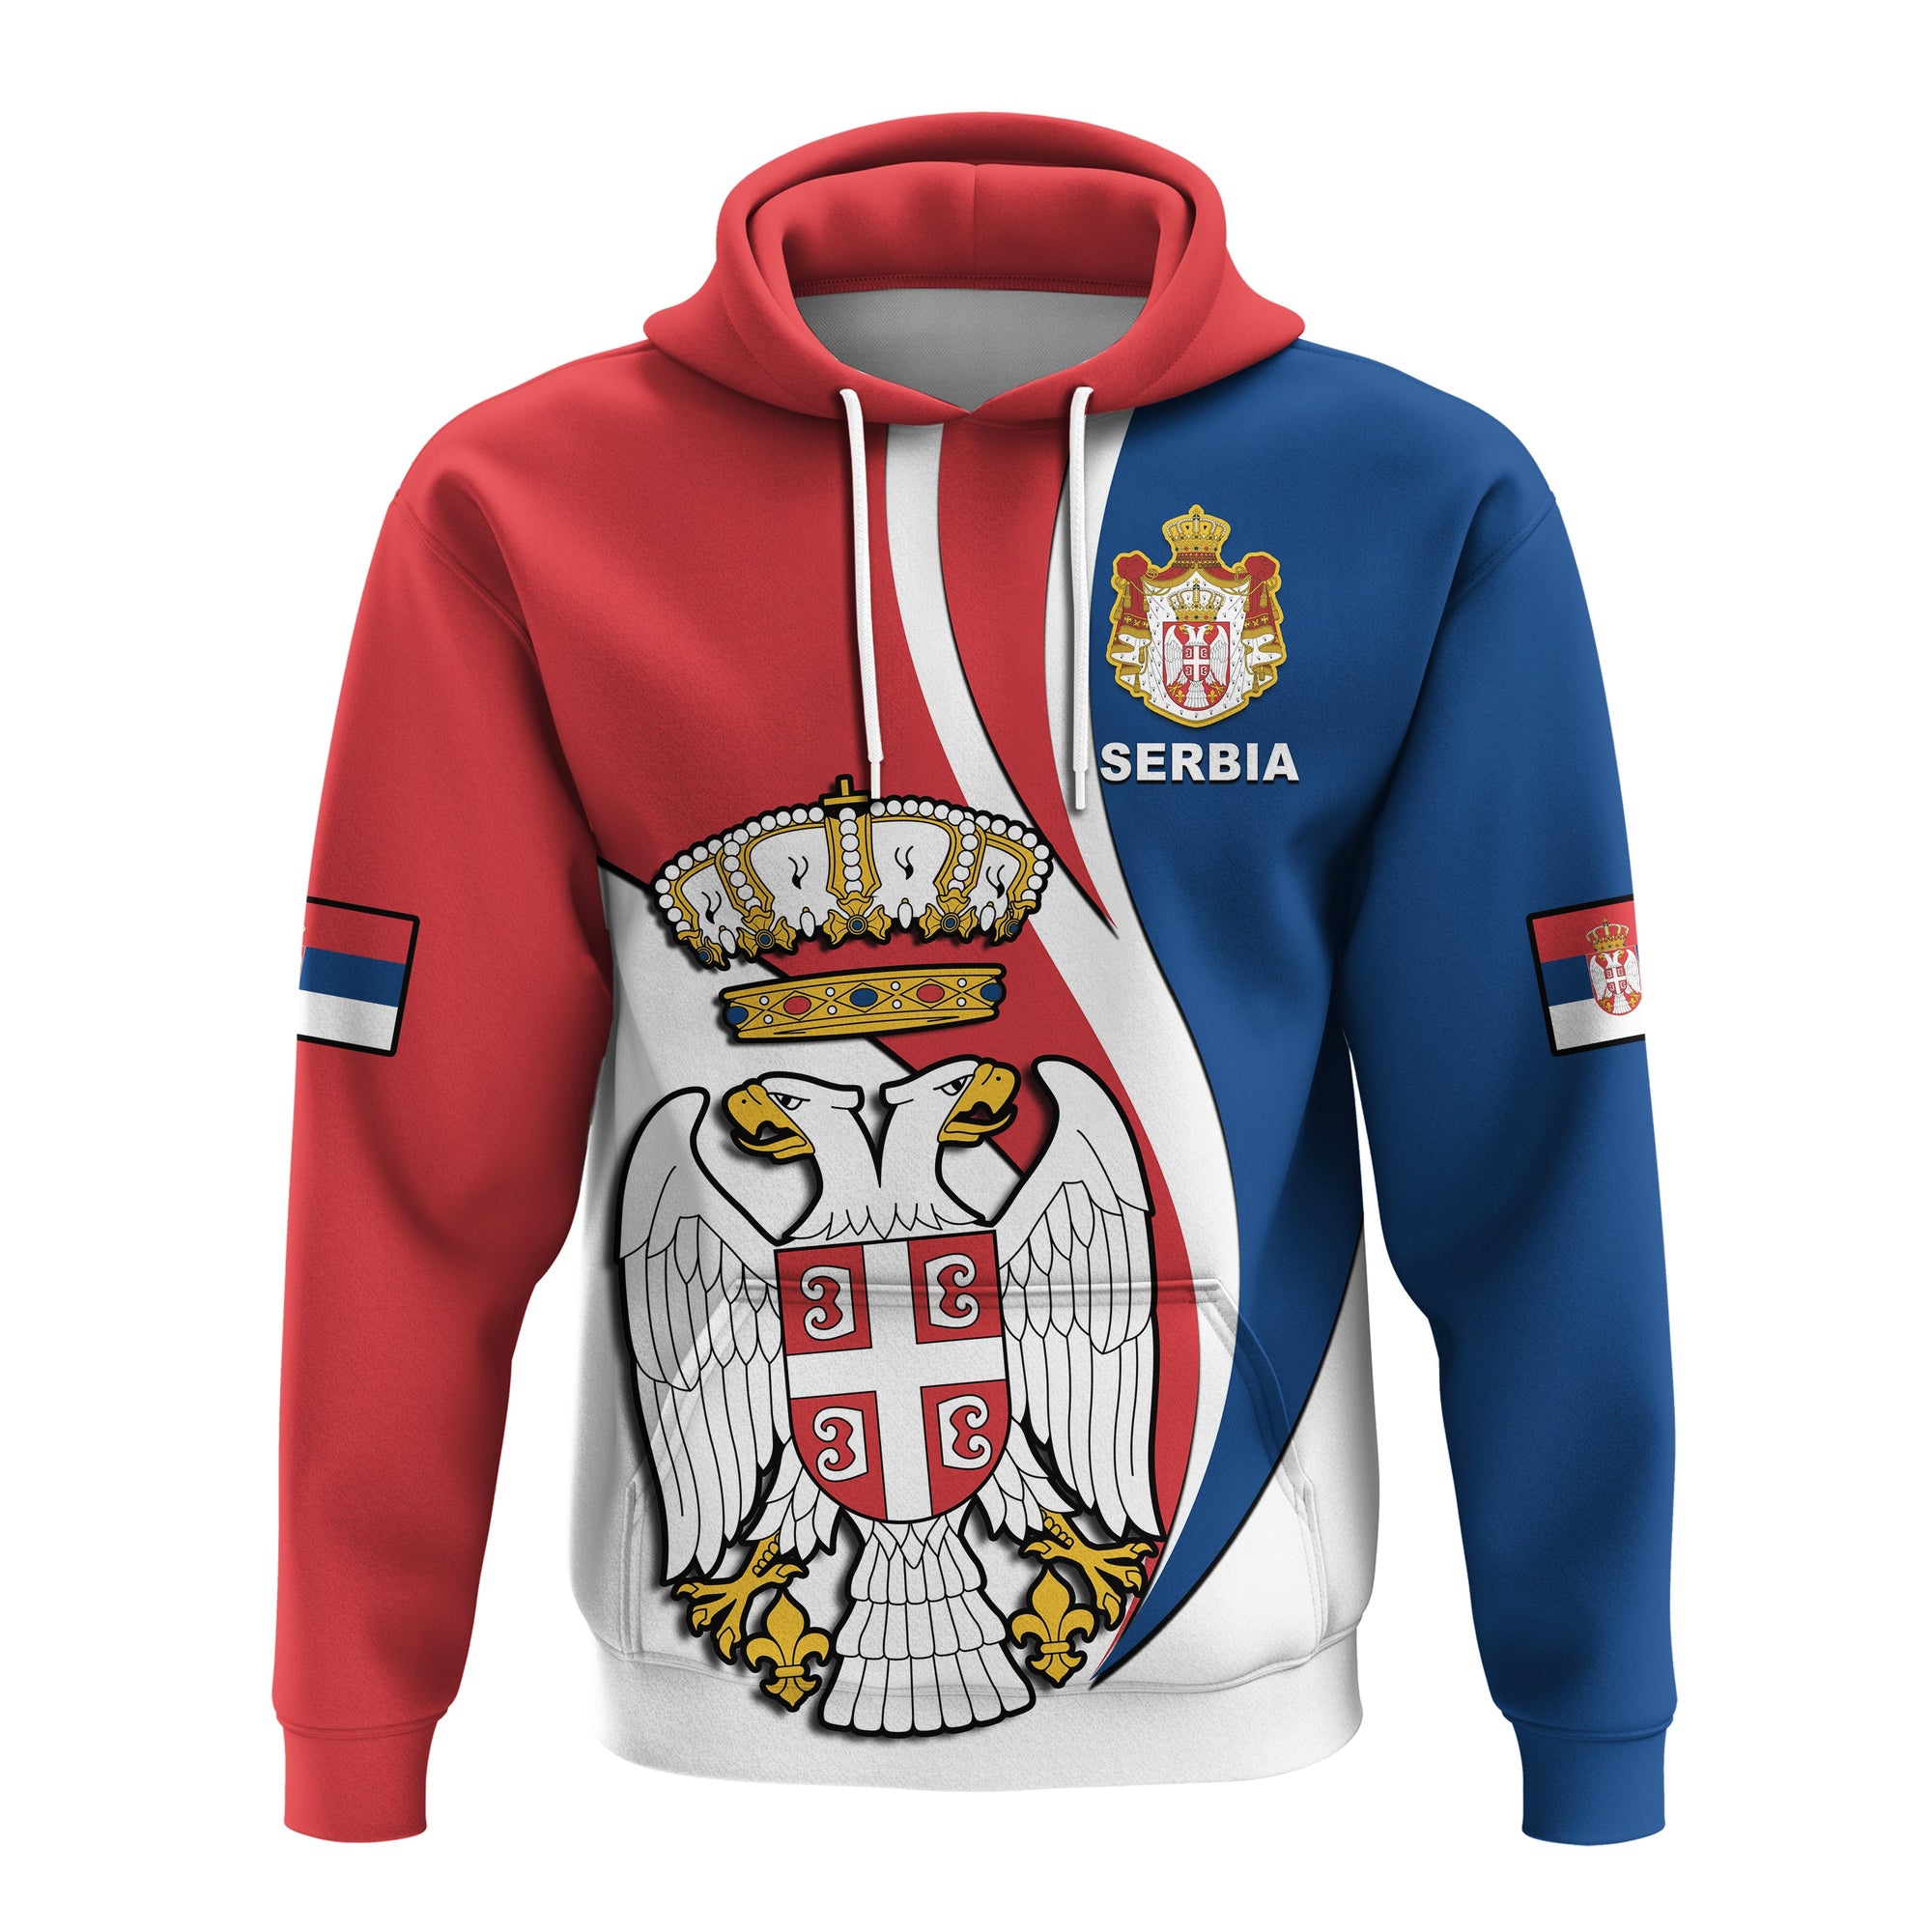 serbia-hoodie-happy-serbian-statehood-day-with-coat-of-arms